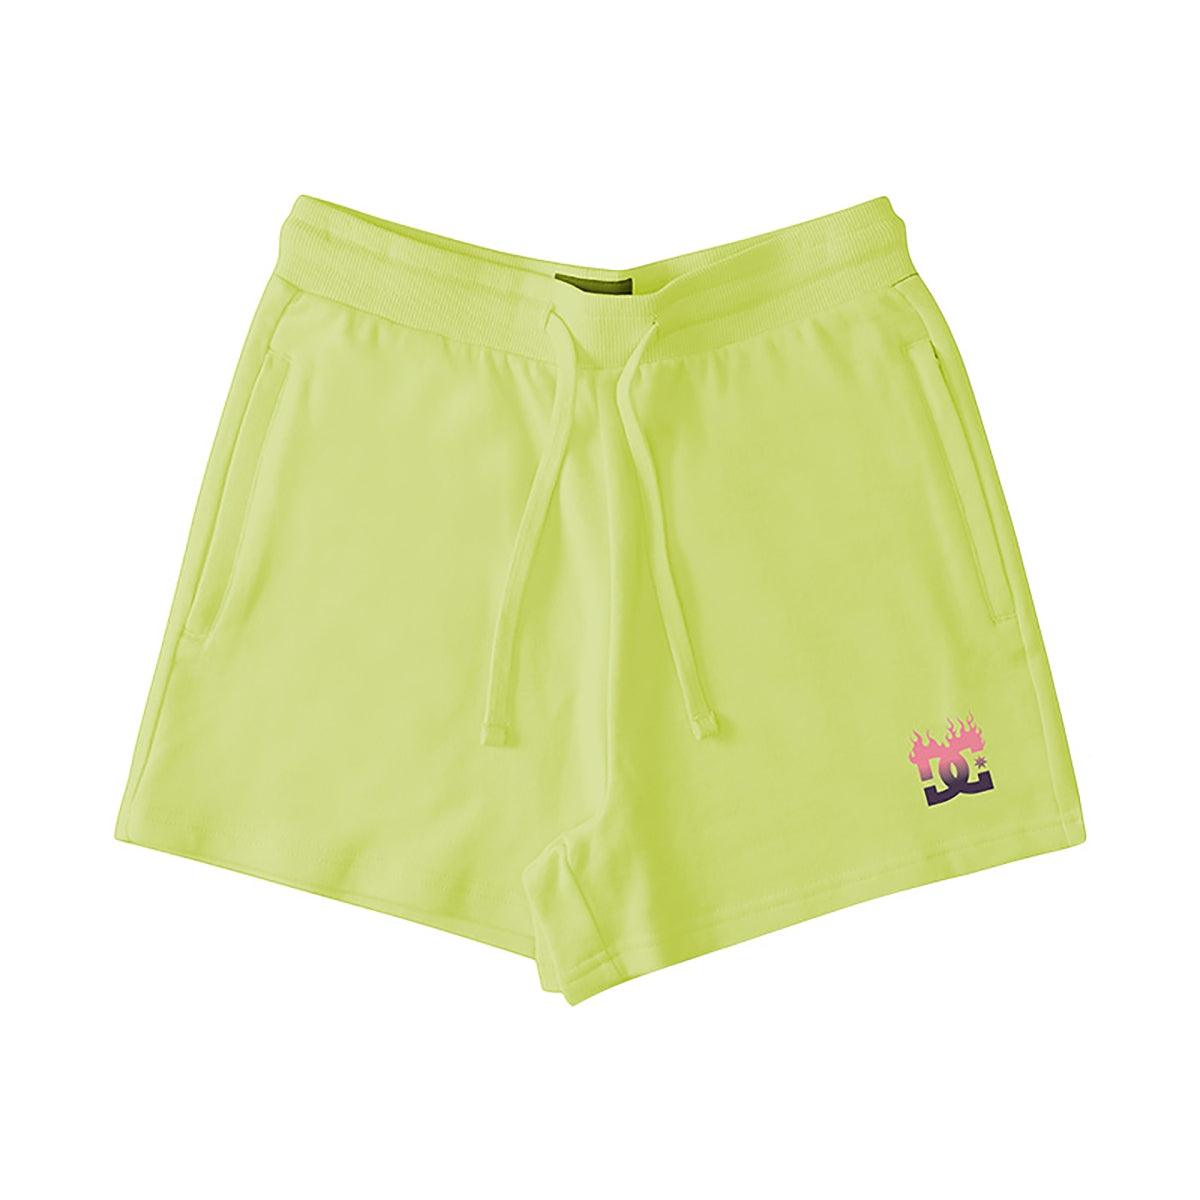 Short Dc Star Flame Mujer Verde Lima - Indy